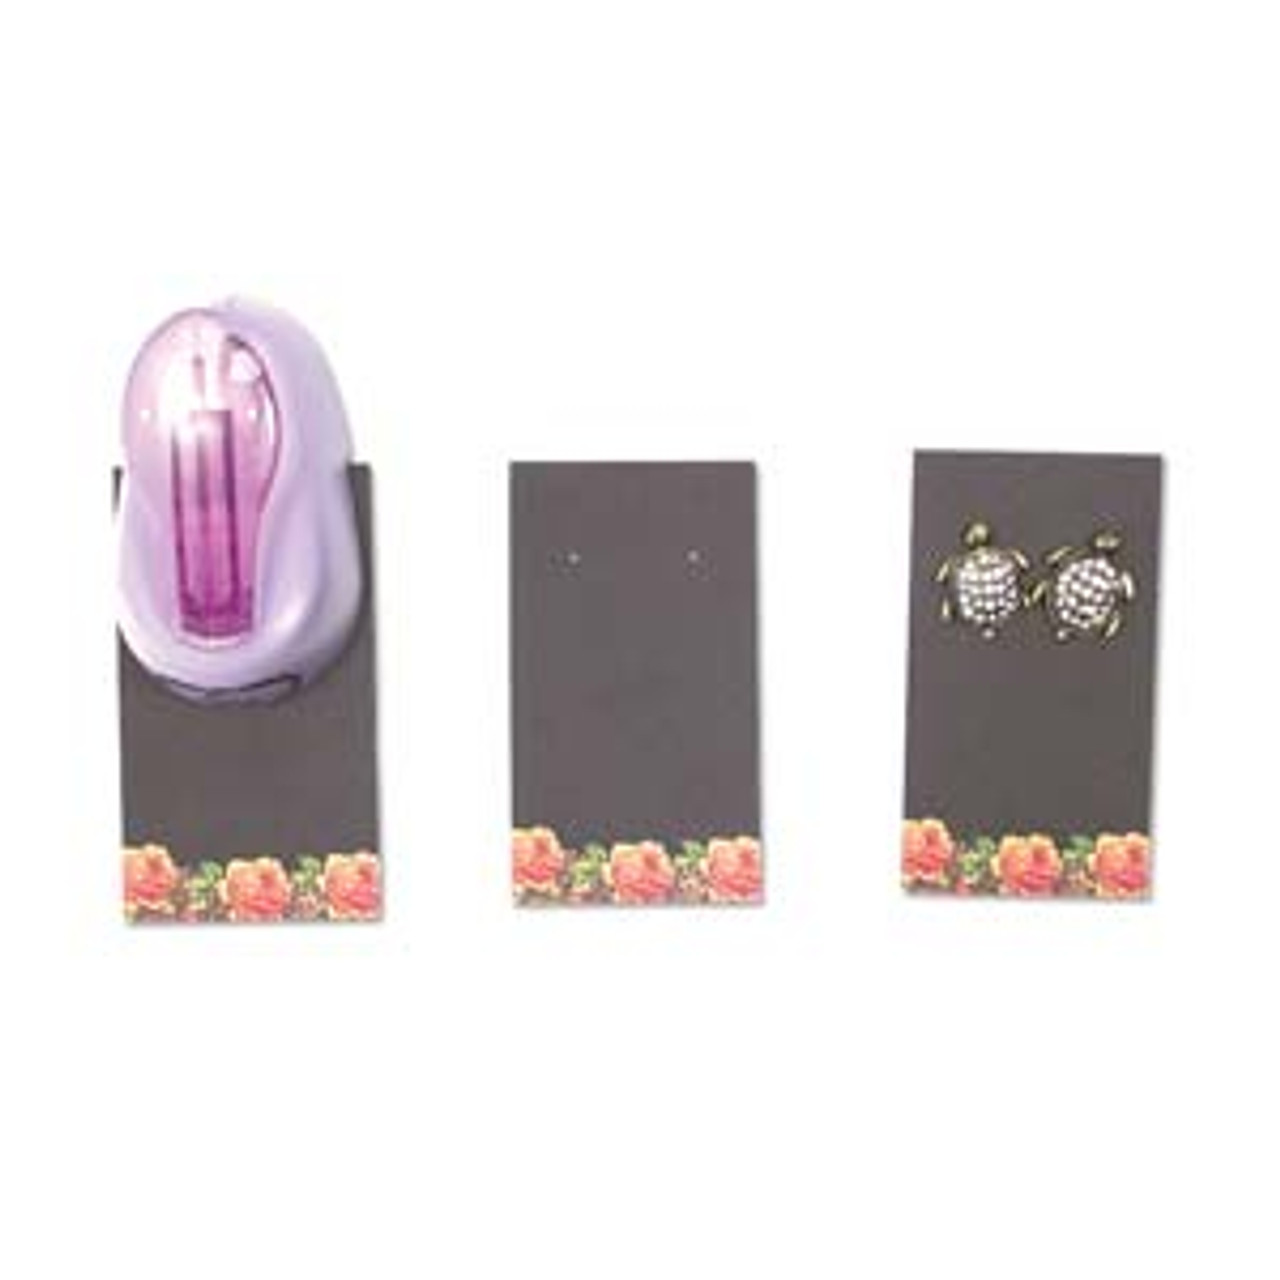 Earring Card Punch - Double holes - Perfect for punching business cards. -  Metal Designz